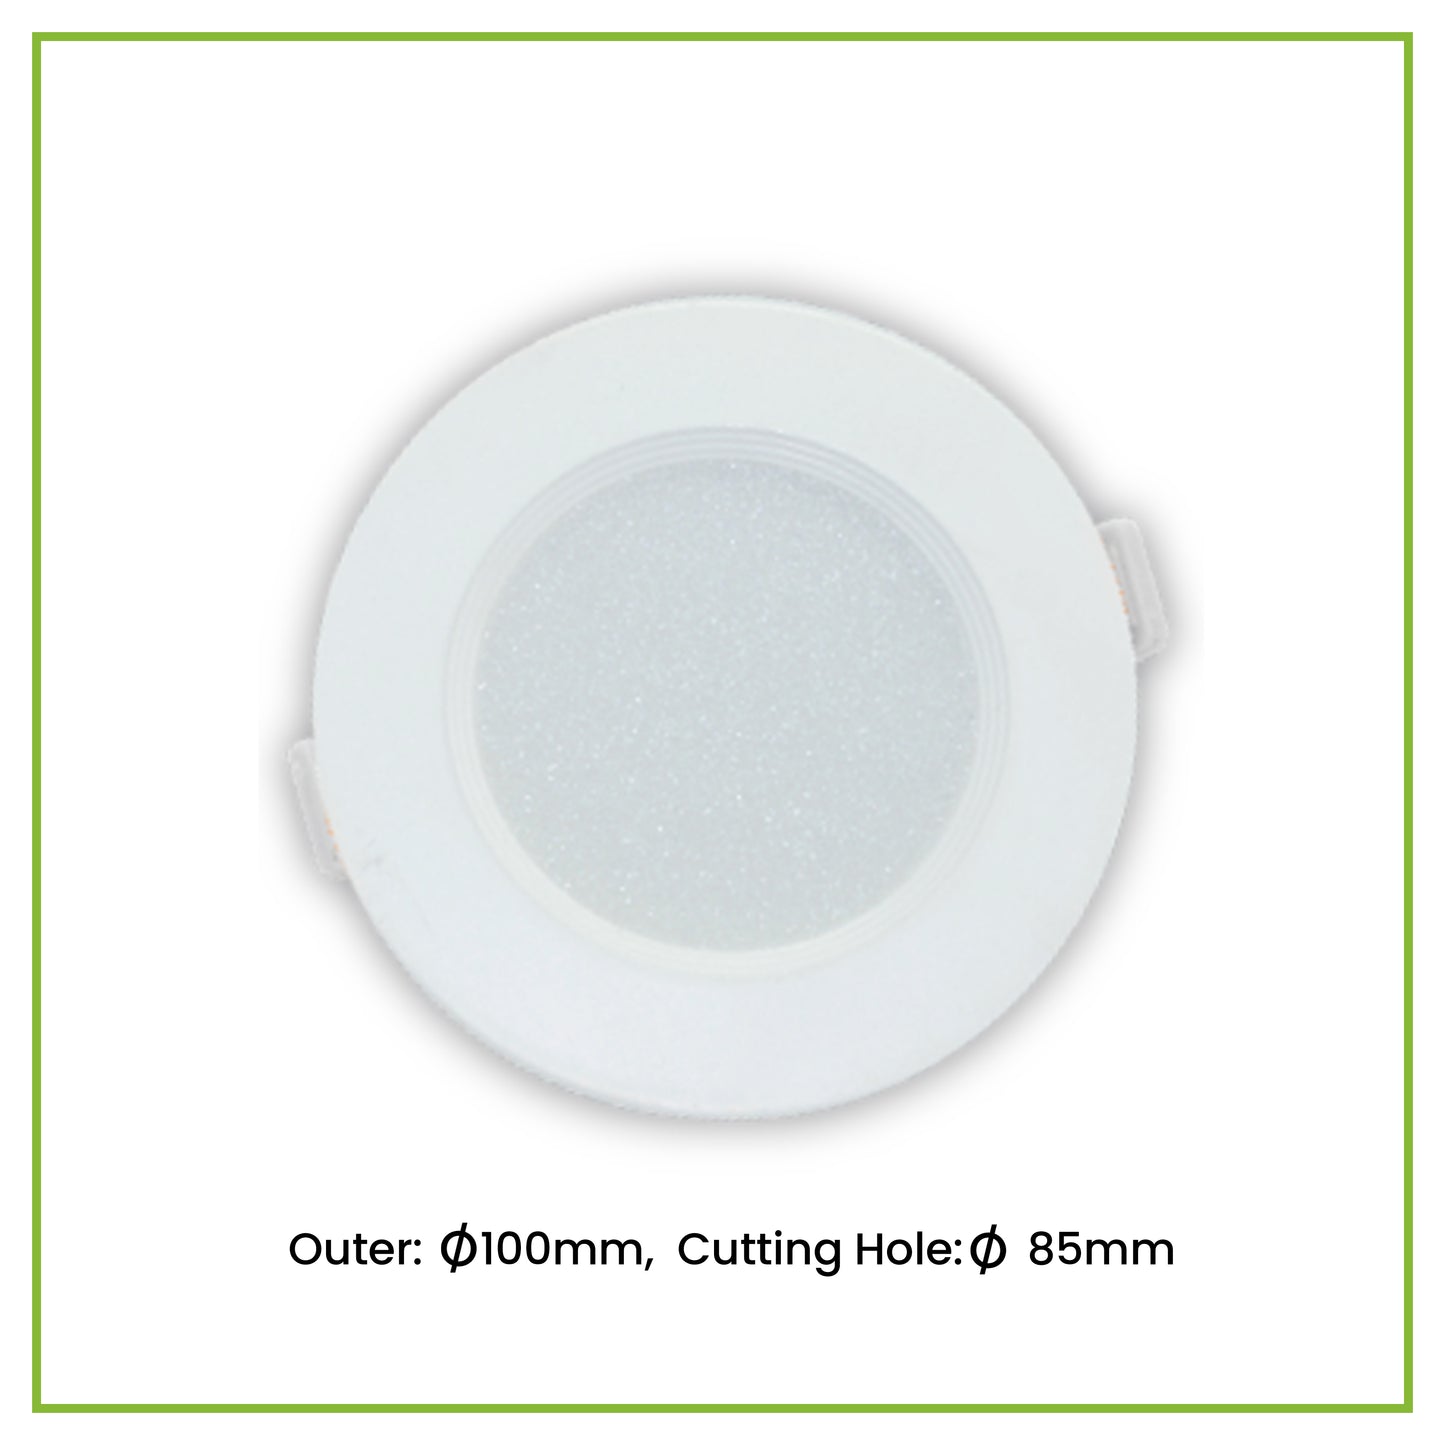 Nxled LED Tri-Color Downlight (ANX-CC3WQ)